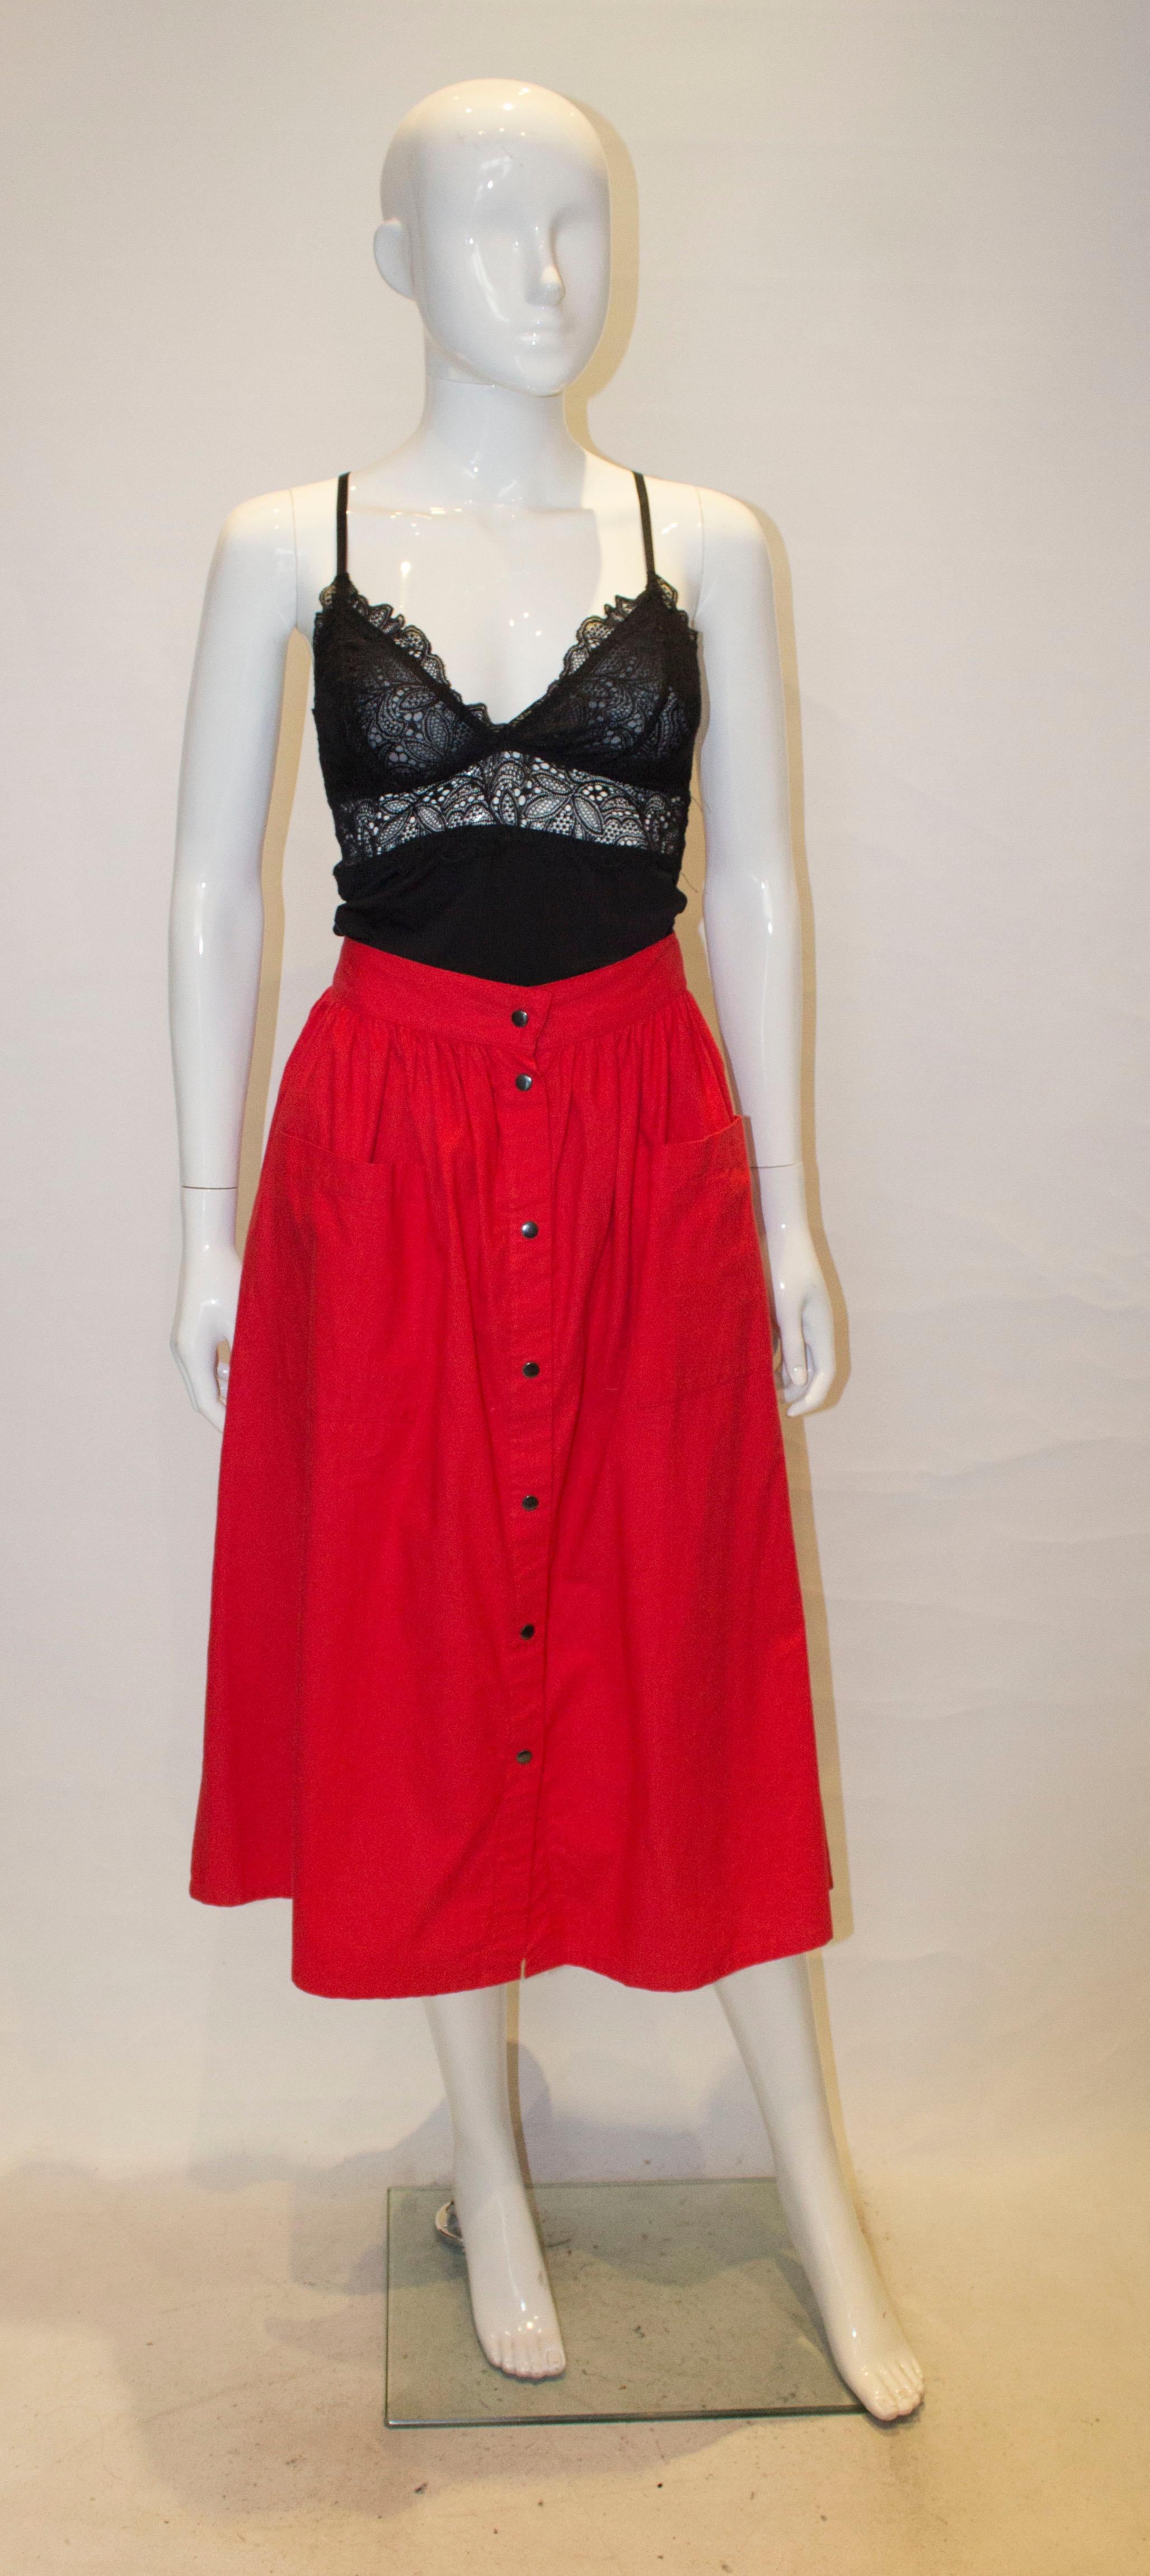 A fun vintage skirt by Biba. In a red cotton the skirt has gathering at the waist, a front popper opening and two pockets on the front. It is unlined.